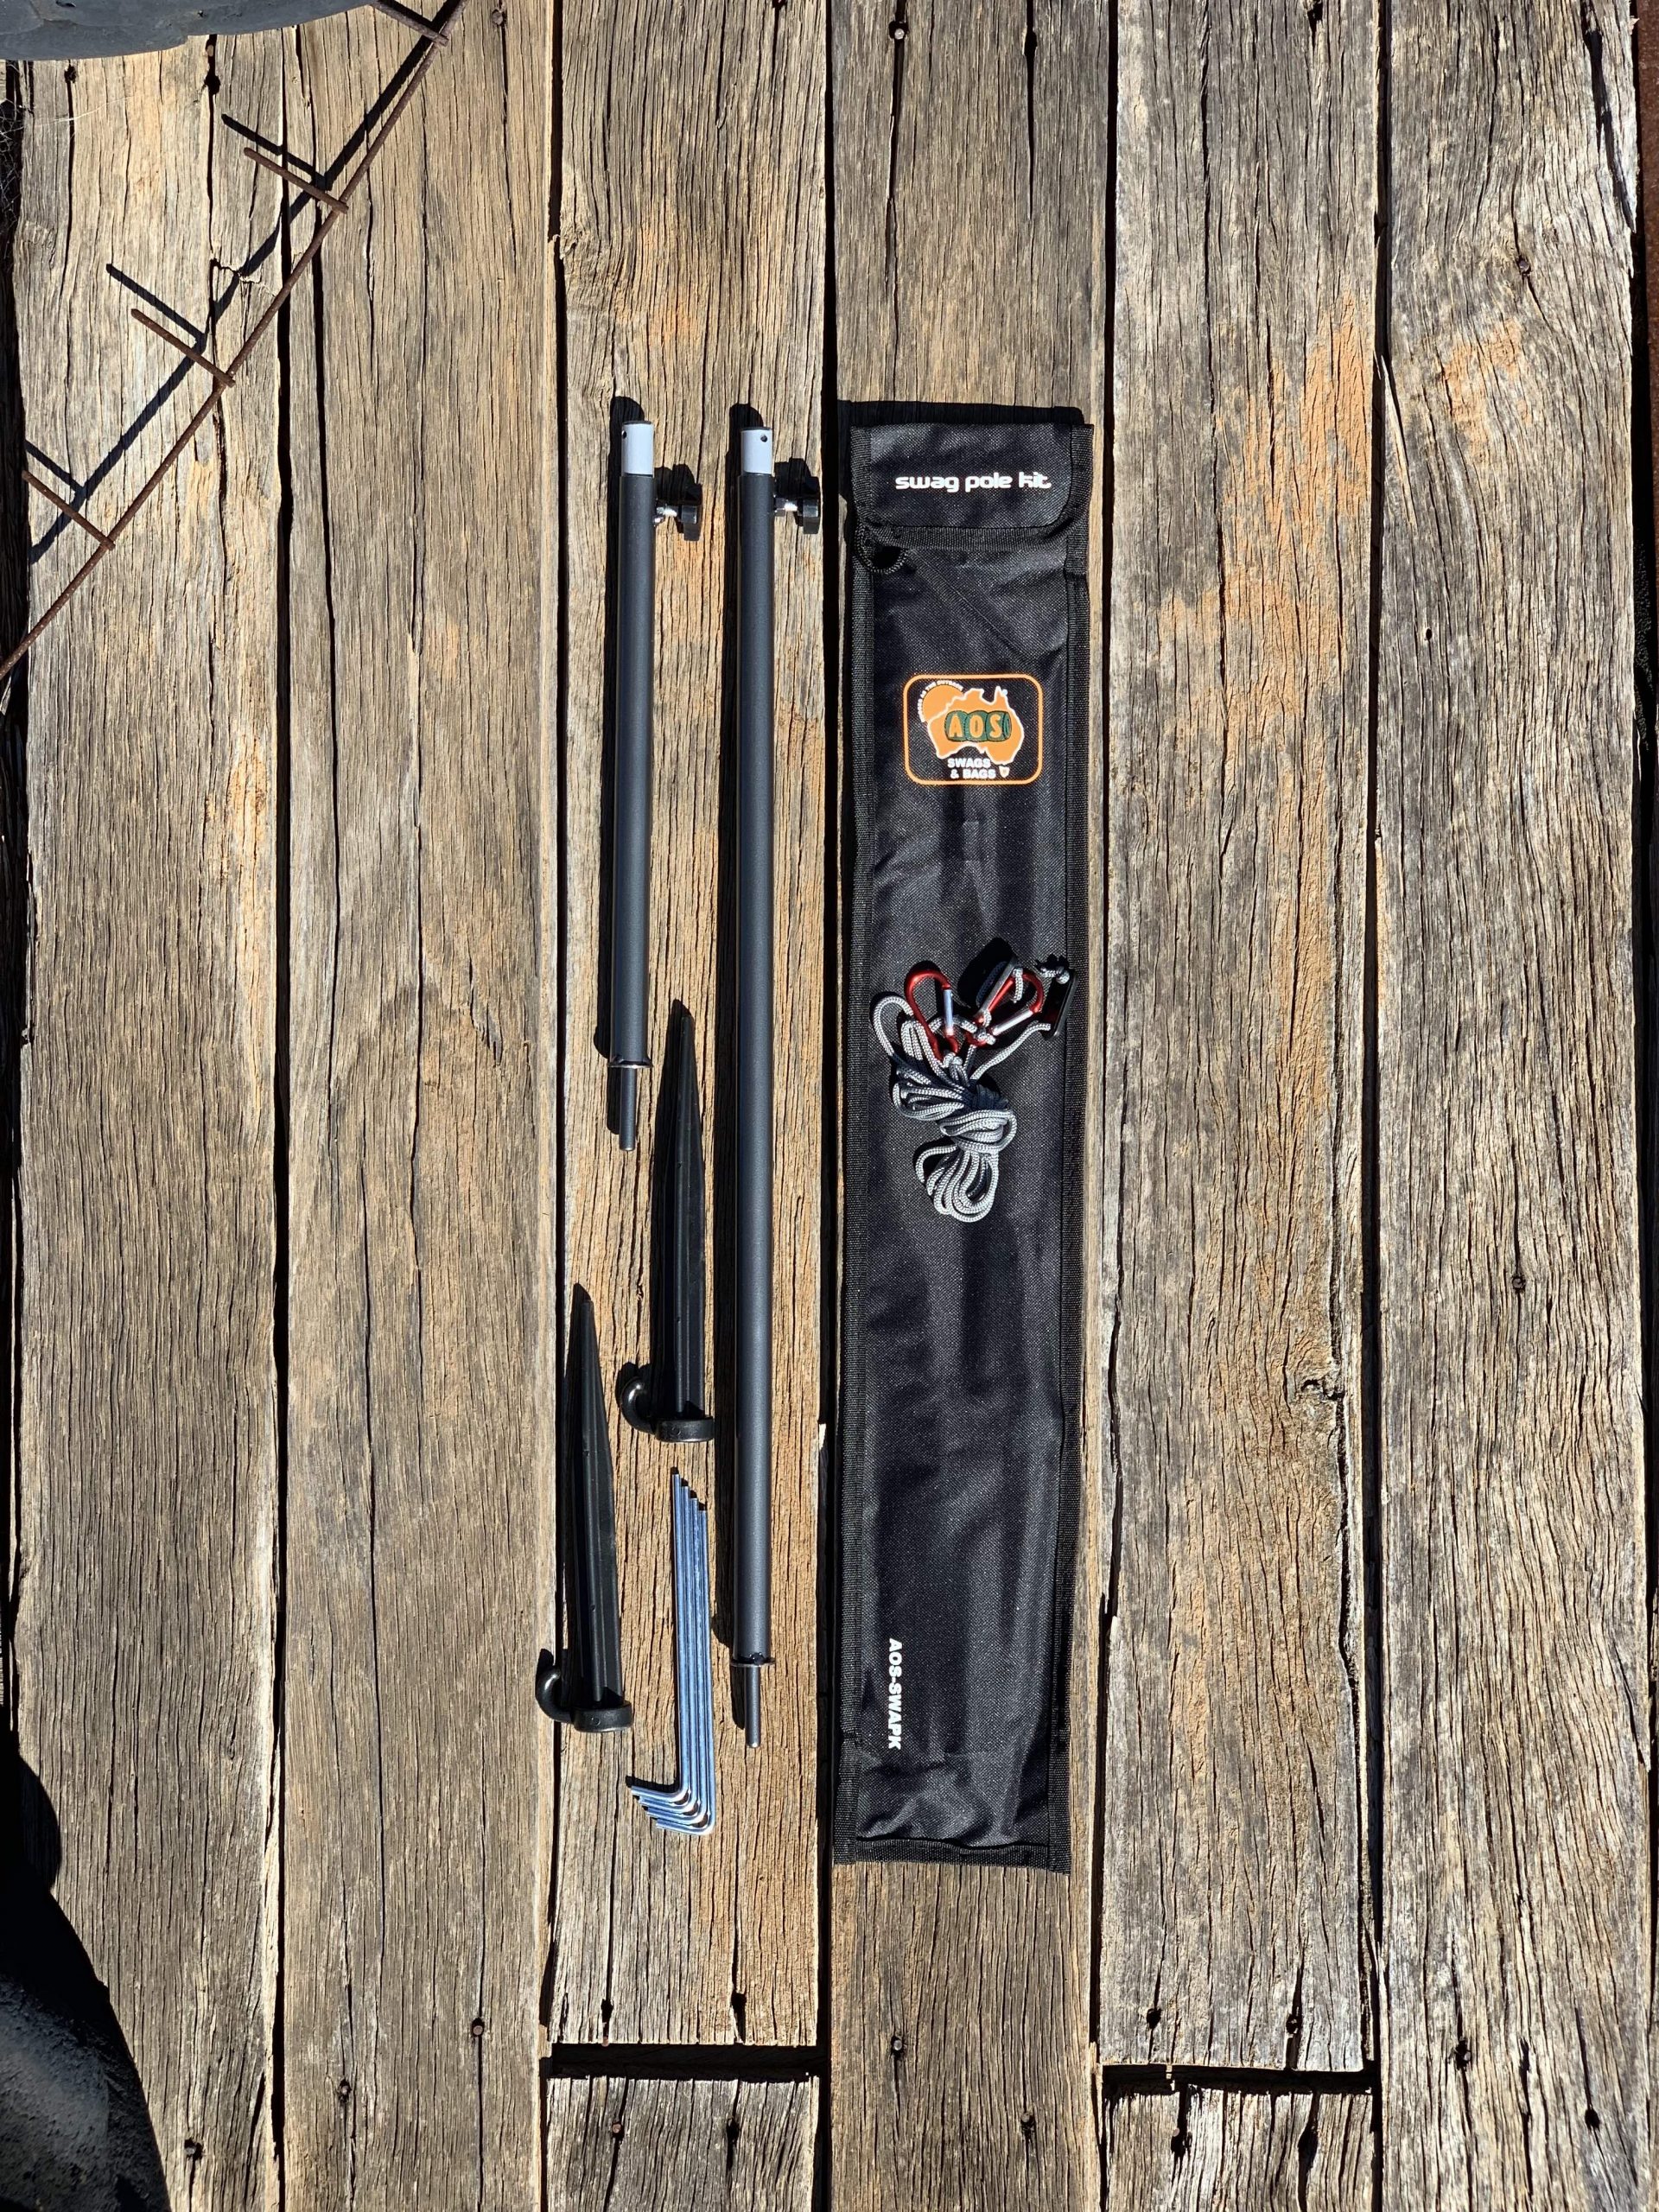 AOS Adjustable Swag Pole Kit to suit Apex or Tent style swags - Aussie  Outback Supplies